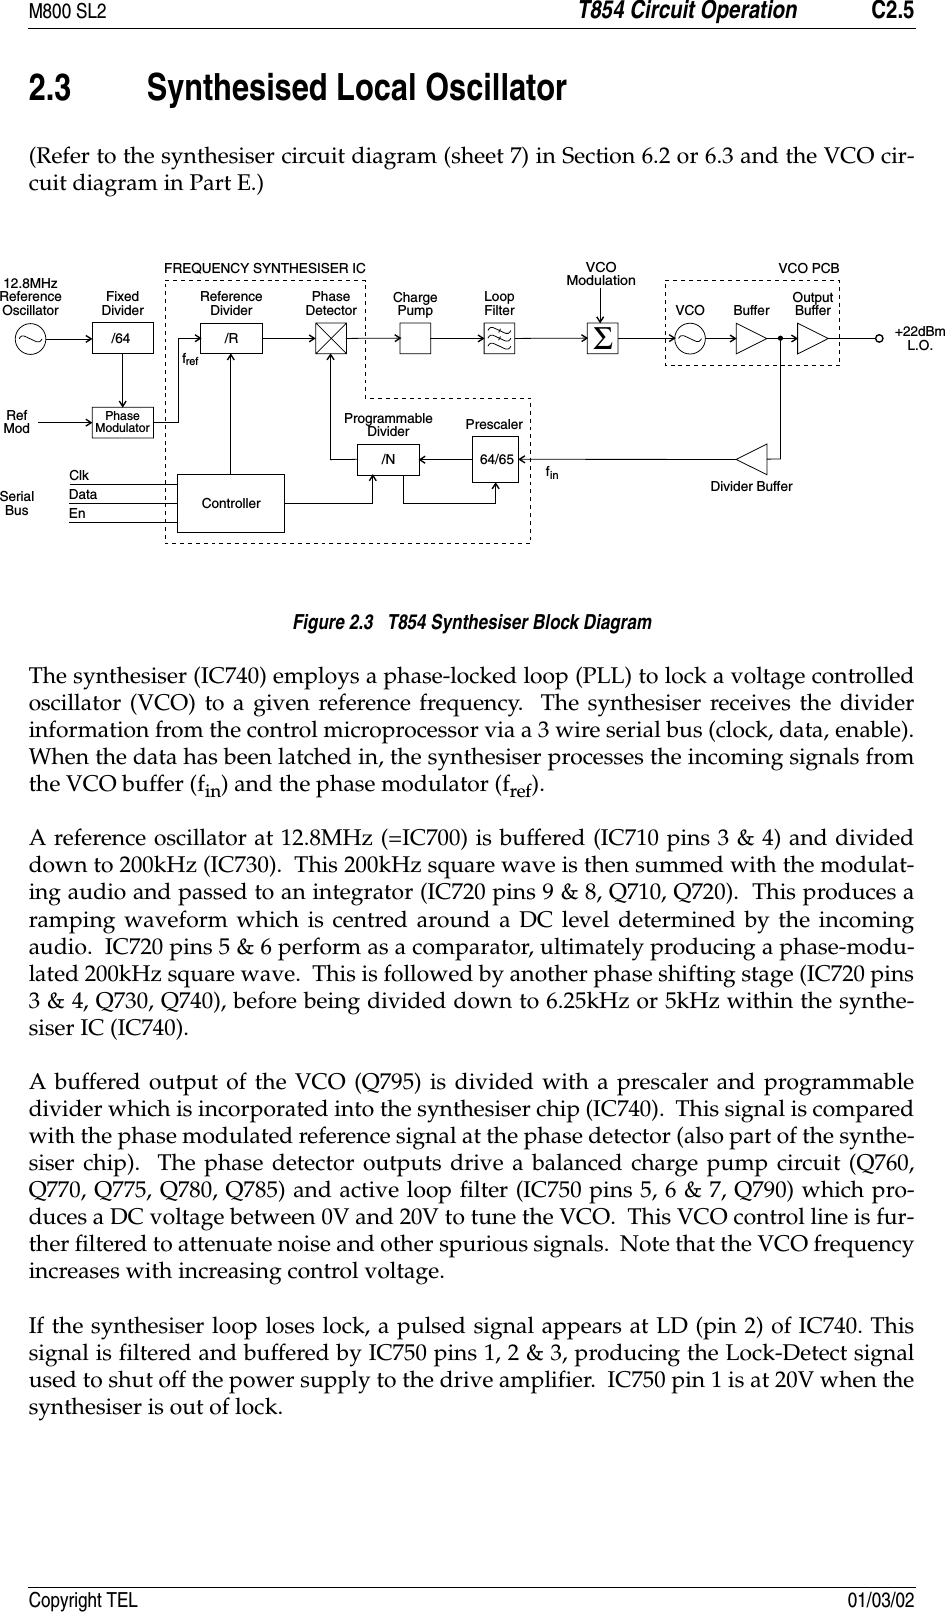 M800 SL2 T854 Circuit Operation C2.5Copyright TEL 01/03/022.3 Synthesised Local Oscillator(Refer to the synthesiser circuit diagram (sheet 7) in Section 6.2 or 6.3 and the VCO cir-cuit diagram in Part E.)Figure 2.3   T854 Synthesiser Block DiagramThe synthesiser (IC740) employs a phase-locked loop (PLL) to lock a voltage controlledoscillator (VCO) to a given reference frequency.  The synthesiser receives the dividerinformation from the control microprocessor via a 3 wire serial bus (clock, data, enable).When the data has been latched in, the synthesiser processes the incoming signals fromthe VCO buffer (fin) and the phase modulator (fref).A reference oscillator at 12.8MHz (=IC700) is buffered (IC710 pins 3 &amp; 4) and divideddown to 200kHz (IC730).  This 200kHz square wave is then summed with the modulat-ing audio and passed to an integrator (IC720 pins 9 &amp; 8, Q710, Q720).  This produces aramping waveform which is centred around a DC level determined by the incomingaudio.  IC720 pins 5 &amp; 6 perform as a comparator, ultimately producing a phase-modu-lated 200kHz square wave.  This is followed by another phase shifting stage (IC720 pins3 &amp; 4, Q730, Q740), before being divided down to 6.25kHz or 5kHz within the synthe-siser IC (IC740).A buffered output of the VCO (Q795) is divided with a prescaler and programmabledivider which is incorporated into the synthesiser chip (IC740).  This signal is comparedwith the phase modulated reference signal at the phase detector (also part of the synthe-siser chip).  The phase detector outputs drive a balanced charge pump circuit (Q760,Q770, Q775, Q780, Q785) and active loop filter (IC750 pins 5, 6 &amp; 7, Q790) which pro-duces a DC voltage between 0V and 20V to tune the VCO.  This VCO control line is fur-ther filtered to attenuate noise and other spurious signals.  Note that the VCO frequencyincreases with increasing control voltage.If the synthesiser loop loses lock, a pulsed signal appears at LD (pin 2) of IC740. Thissignal is filtered and buffered by IC750 pins 1, 2 &amp; 3, producing the Lock-Detect signalused to shut off the power supply to the drive amplifier.  IC750 pin 1 is at 20V when thesynthesiser is out of lock./RReferenceDivider12.8MHzReferenceOscillator FixedDivider/64PhaseModulatorRefModPhaseDetector ChargePump LoopFilterFREQUENCY SYNTHESISER ICSerialBusClkDataEn Controller/NProgrammableDivider64/65PrescalerVCO PCBVCO ModulationVCO Buffer OutputBuffer+22dBmL.O.Divider BufferfreffinΣ